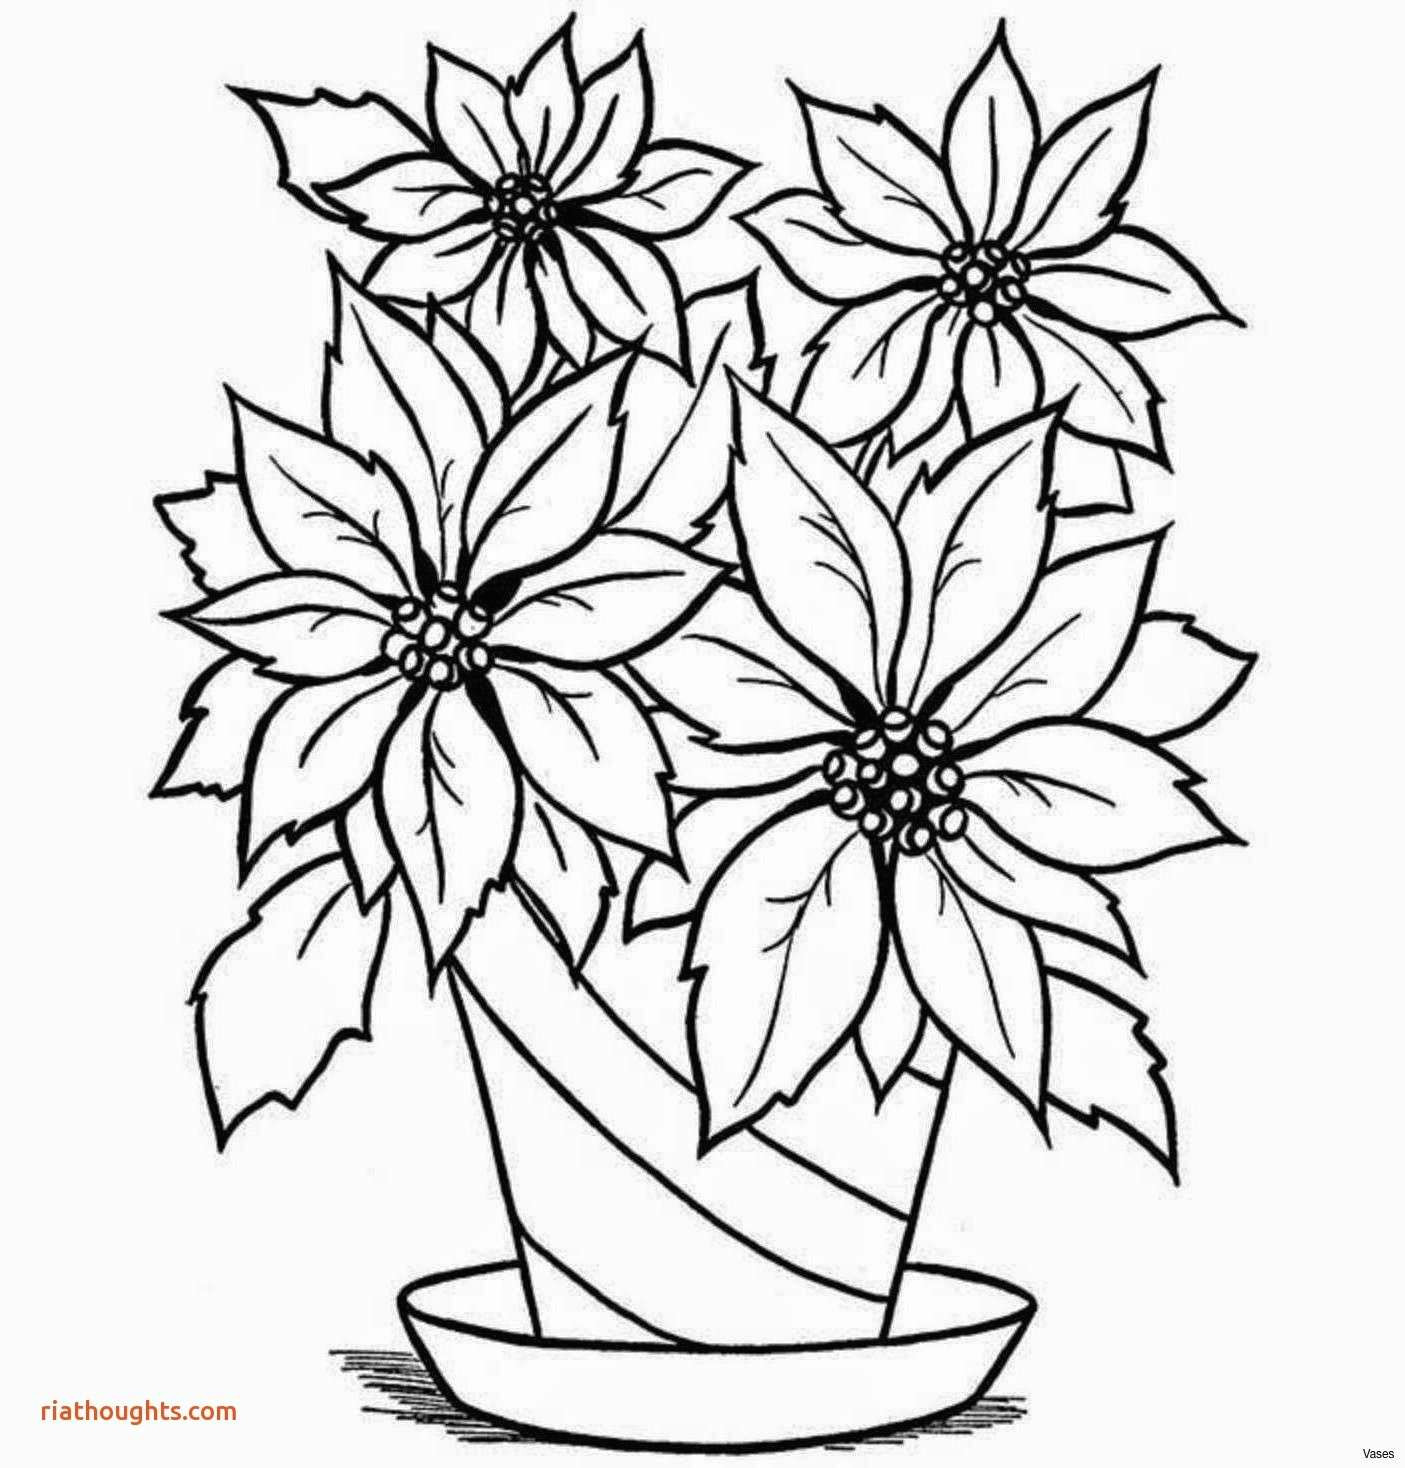 Drawing Of Flowers Black and White 25 Fancy Draw A Flower Helpsite Us